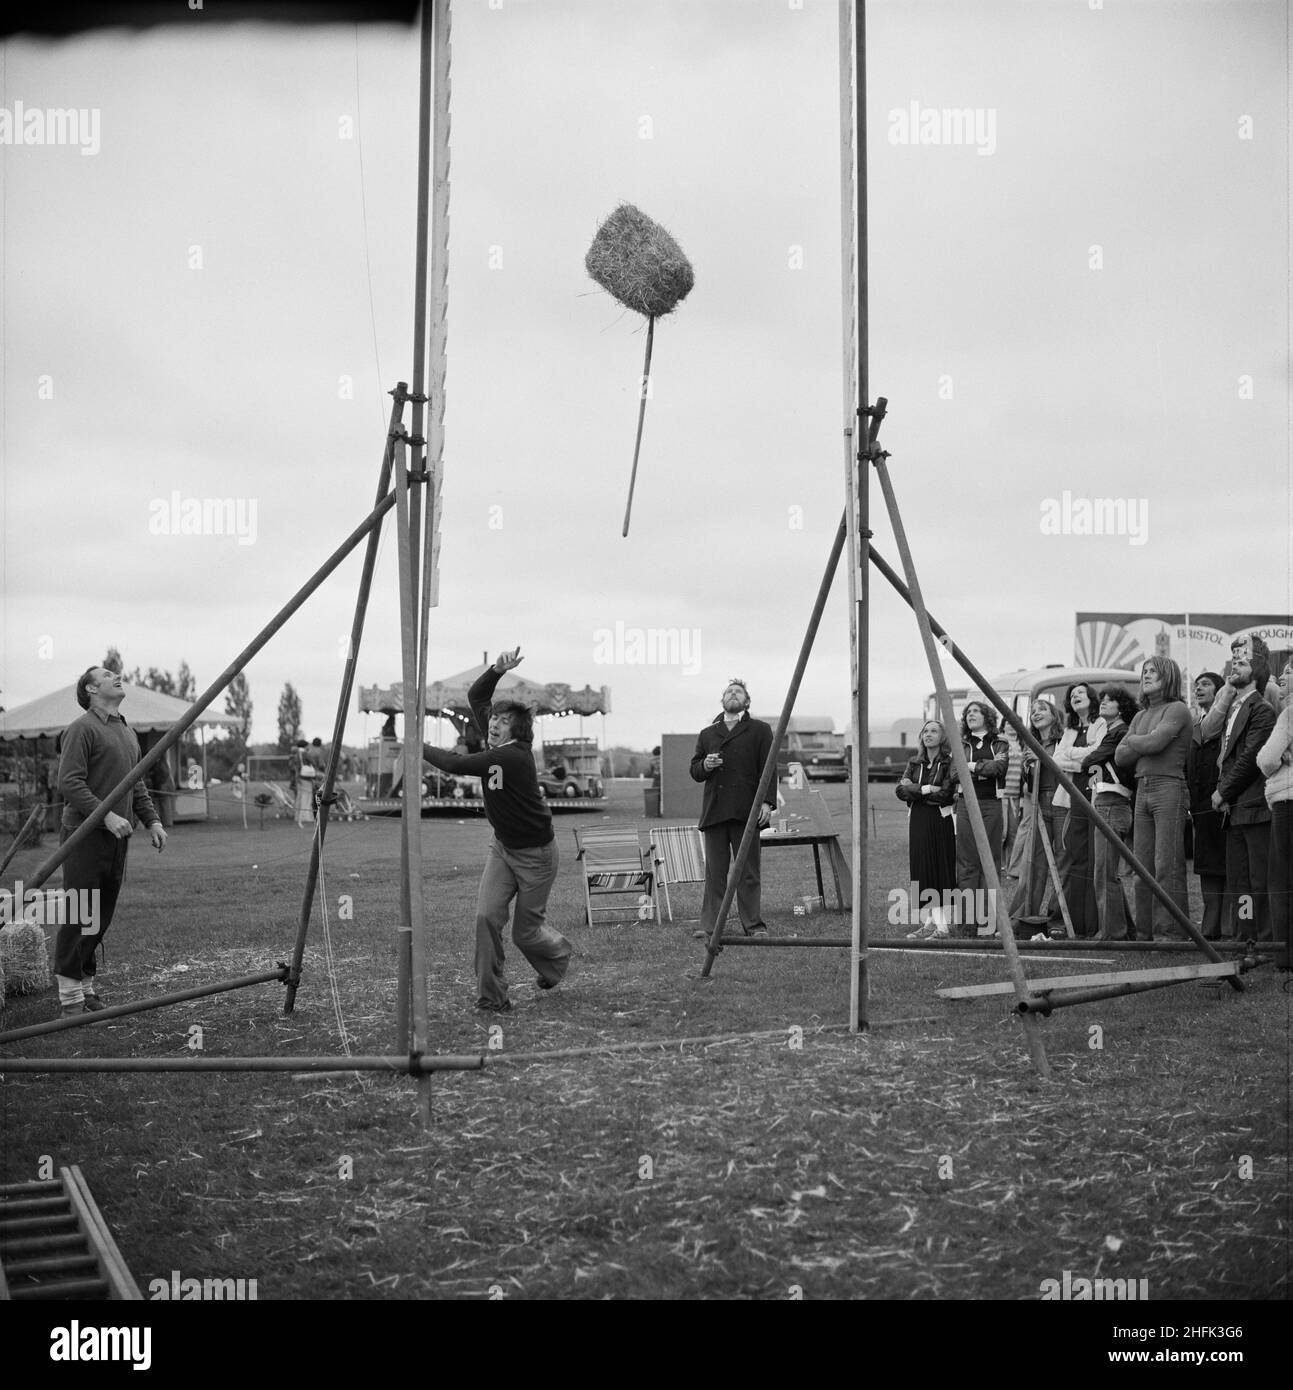 Laing Sports Ground, Rowley Lane, Elstree, Barnet, London, 18/06/1977. A man attempting the 'Hay Toss' at the annual Gala Day, held at the Laing Sports Ground in Elstree. The 'Hay Toss' was run by Laing's Flying Section, the aim was to launch a bale of hay over a high bar using a pitchfork. Stock Photo